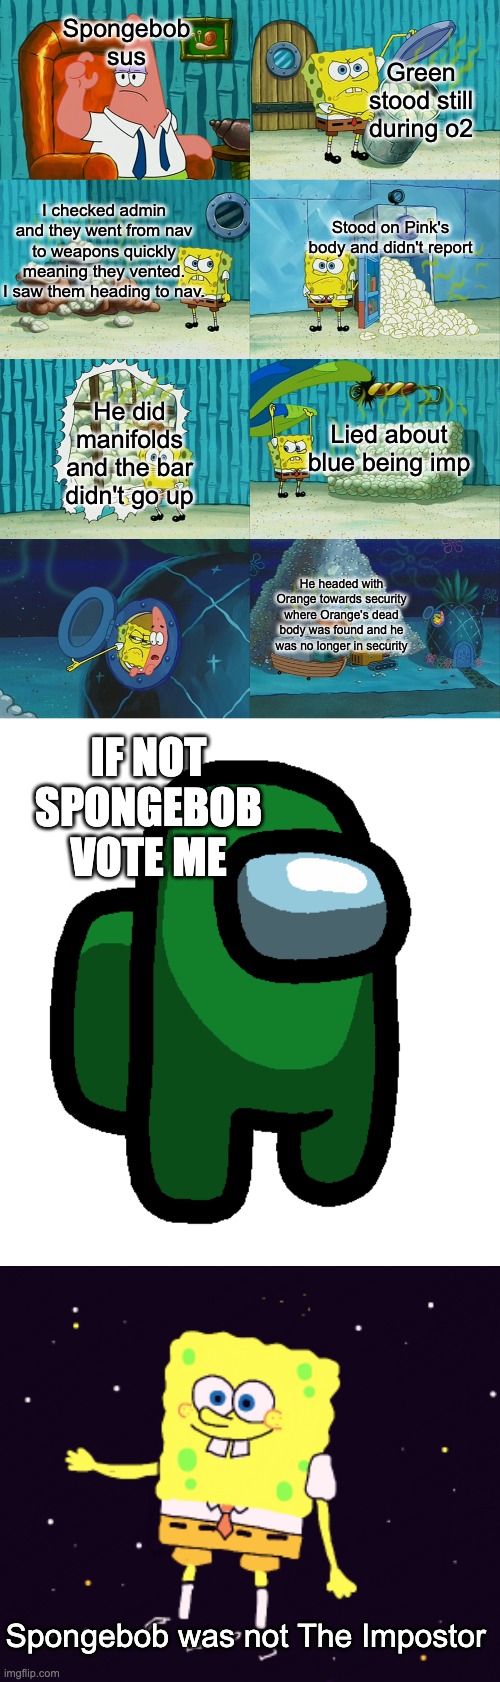 Green sus spongebob | Spongebob sus; Green stood still during o2; I checked admin and they went from nav to weapons quickly meaning they vented. I saw them heading to nav. Stood on Pink's body and didn't report; He did manifolds and the bar didn't go up; Lied about blue being imp; He headed with Orange towards security where Orange's dead body was found and he was no longer in security; IF NOT SPONGEBOB VOTE ME; Spongebob was not The Impostor | image tagged in spongebob diapers meme,among us | made w/ Imgflip meme maker